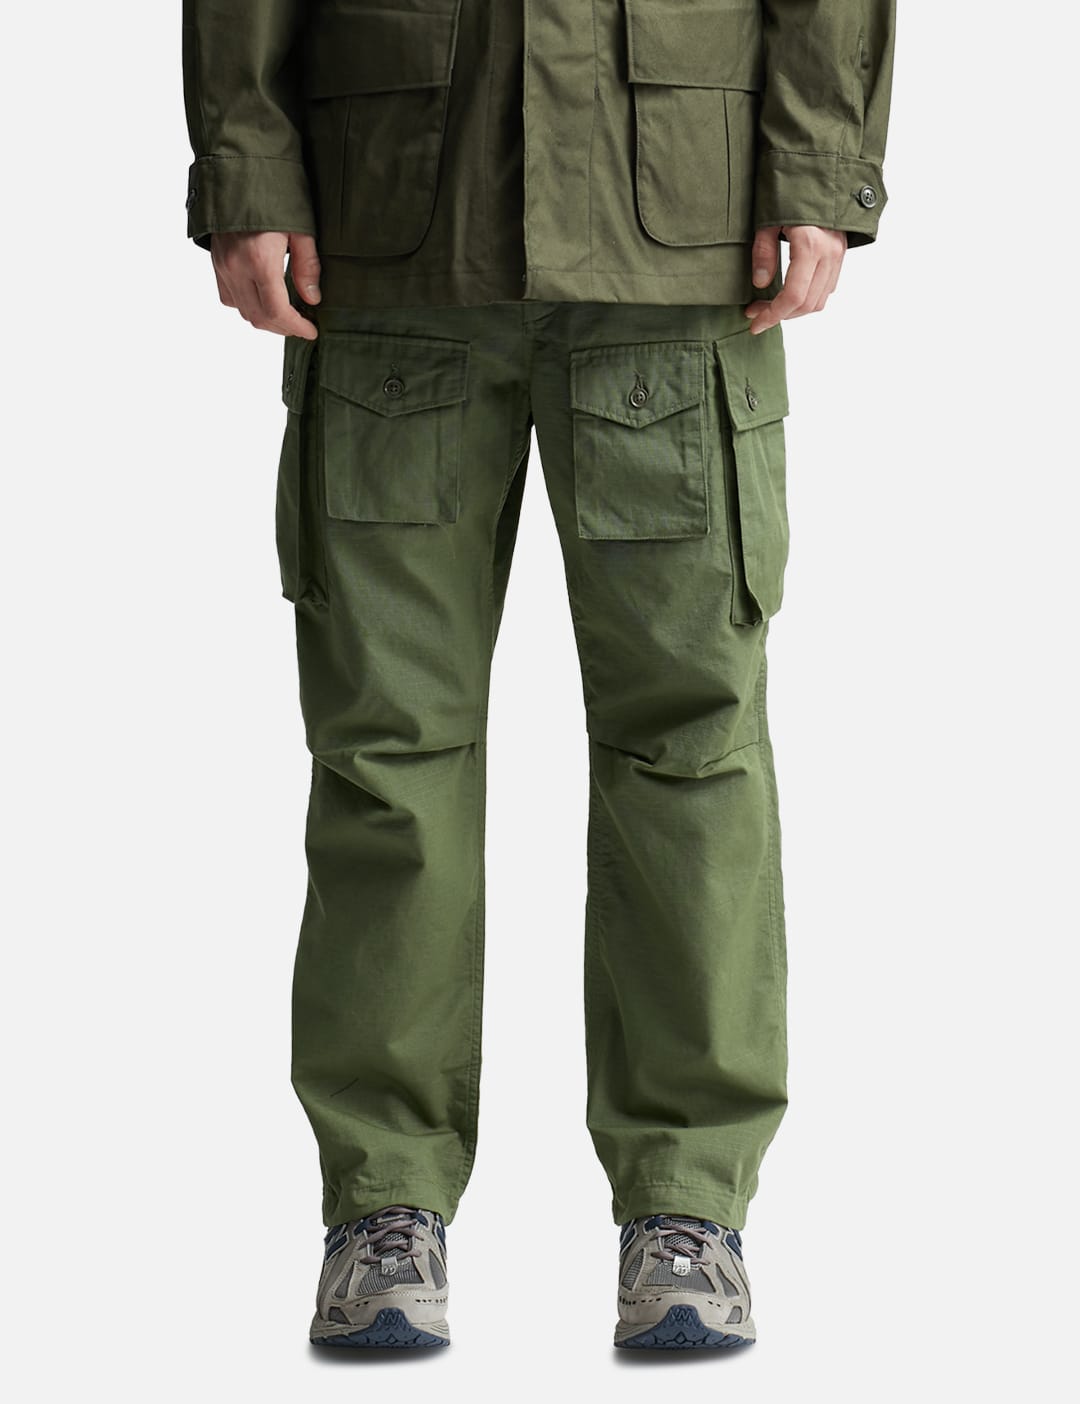 Engineered Garments - FA PANT | HBX - Globally Curated Fashion and 